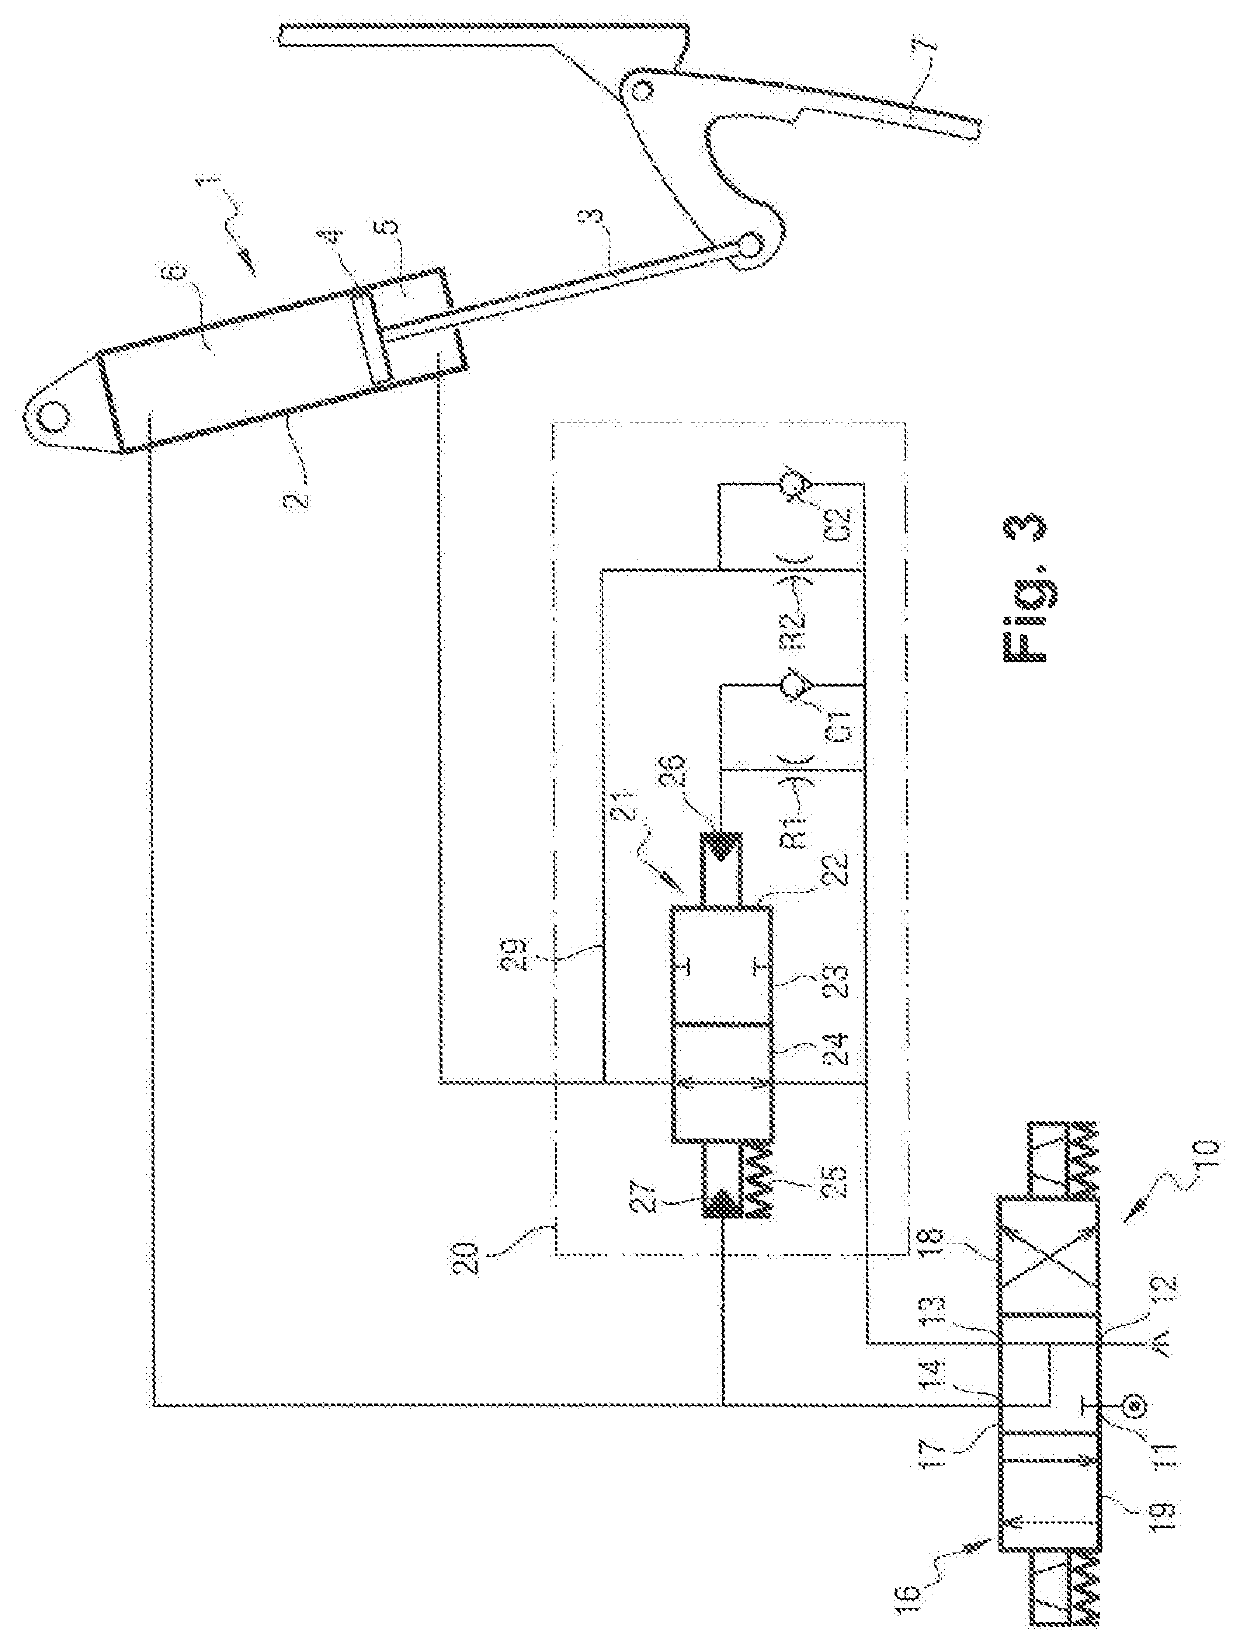 Hydraulic circuit for feeding an actuator, in particular for use in moving a door of an aircraft bay